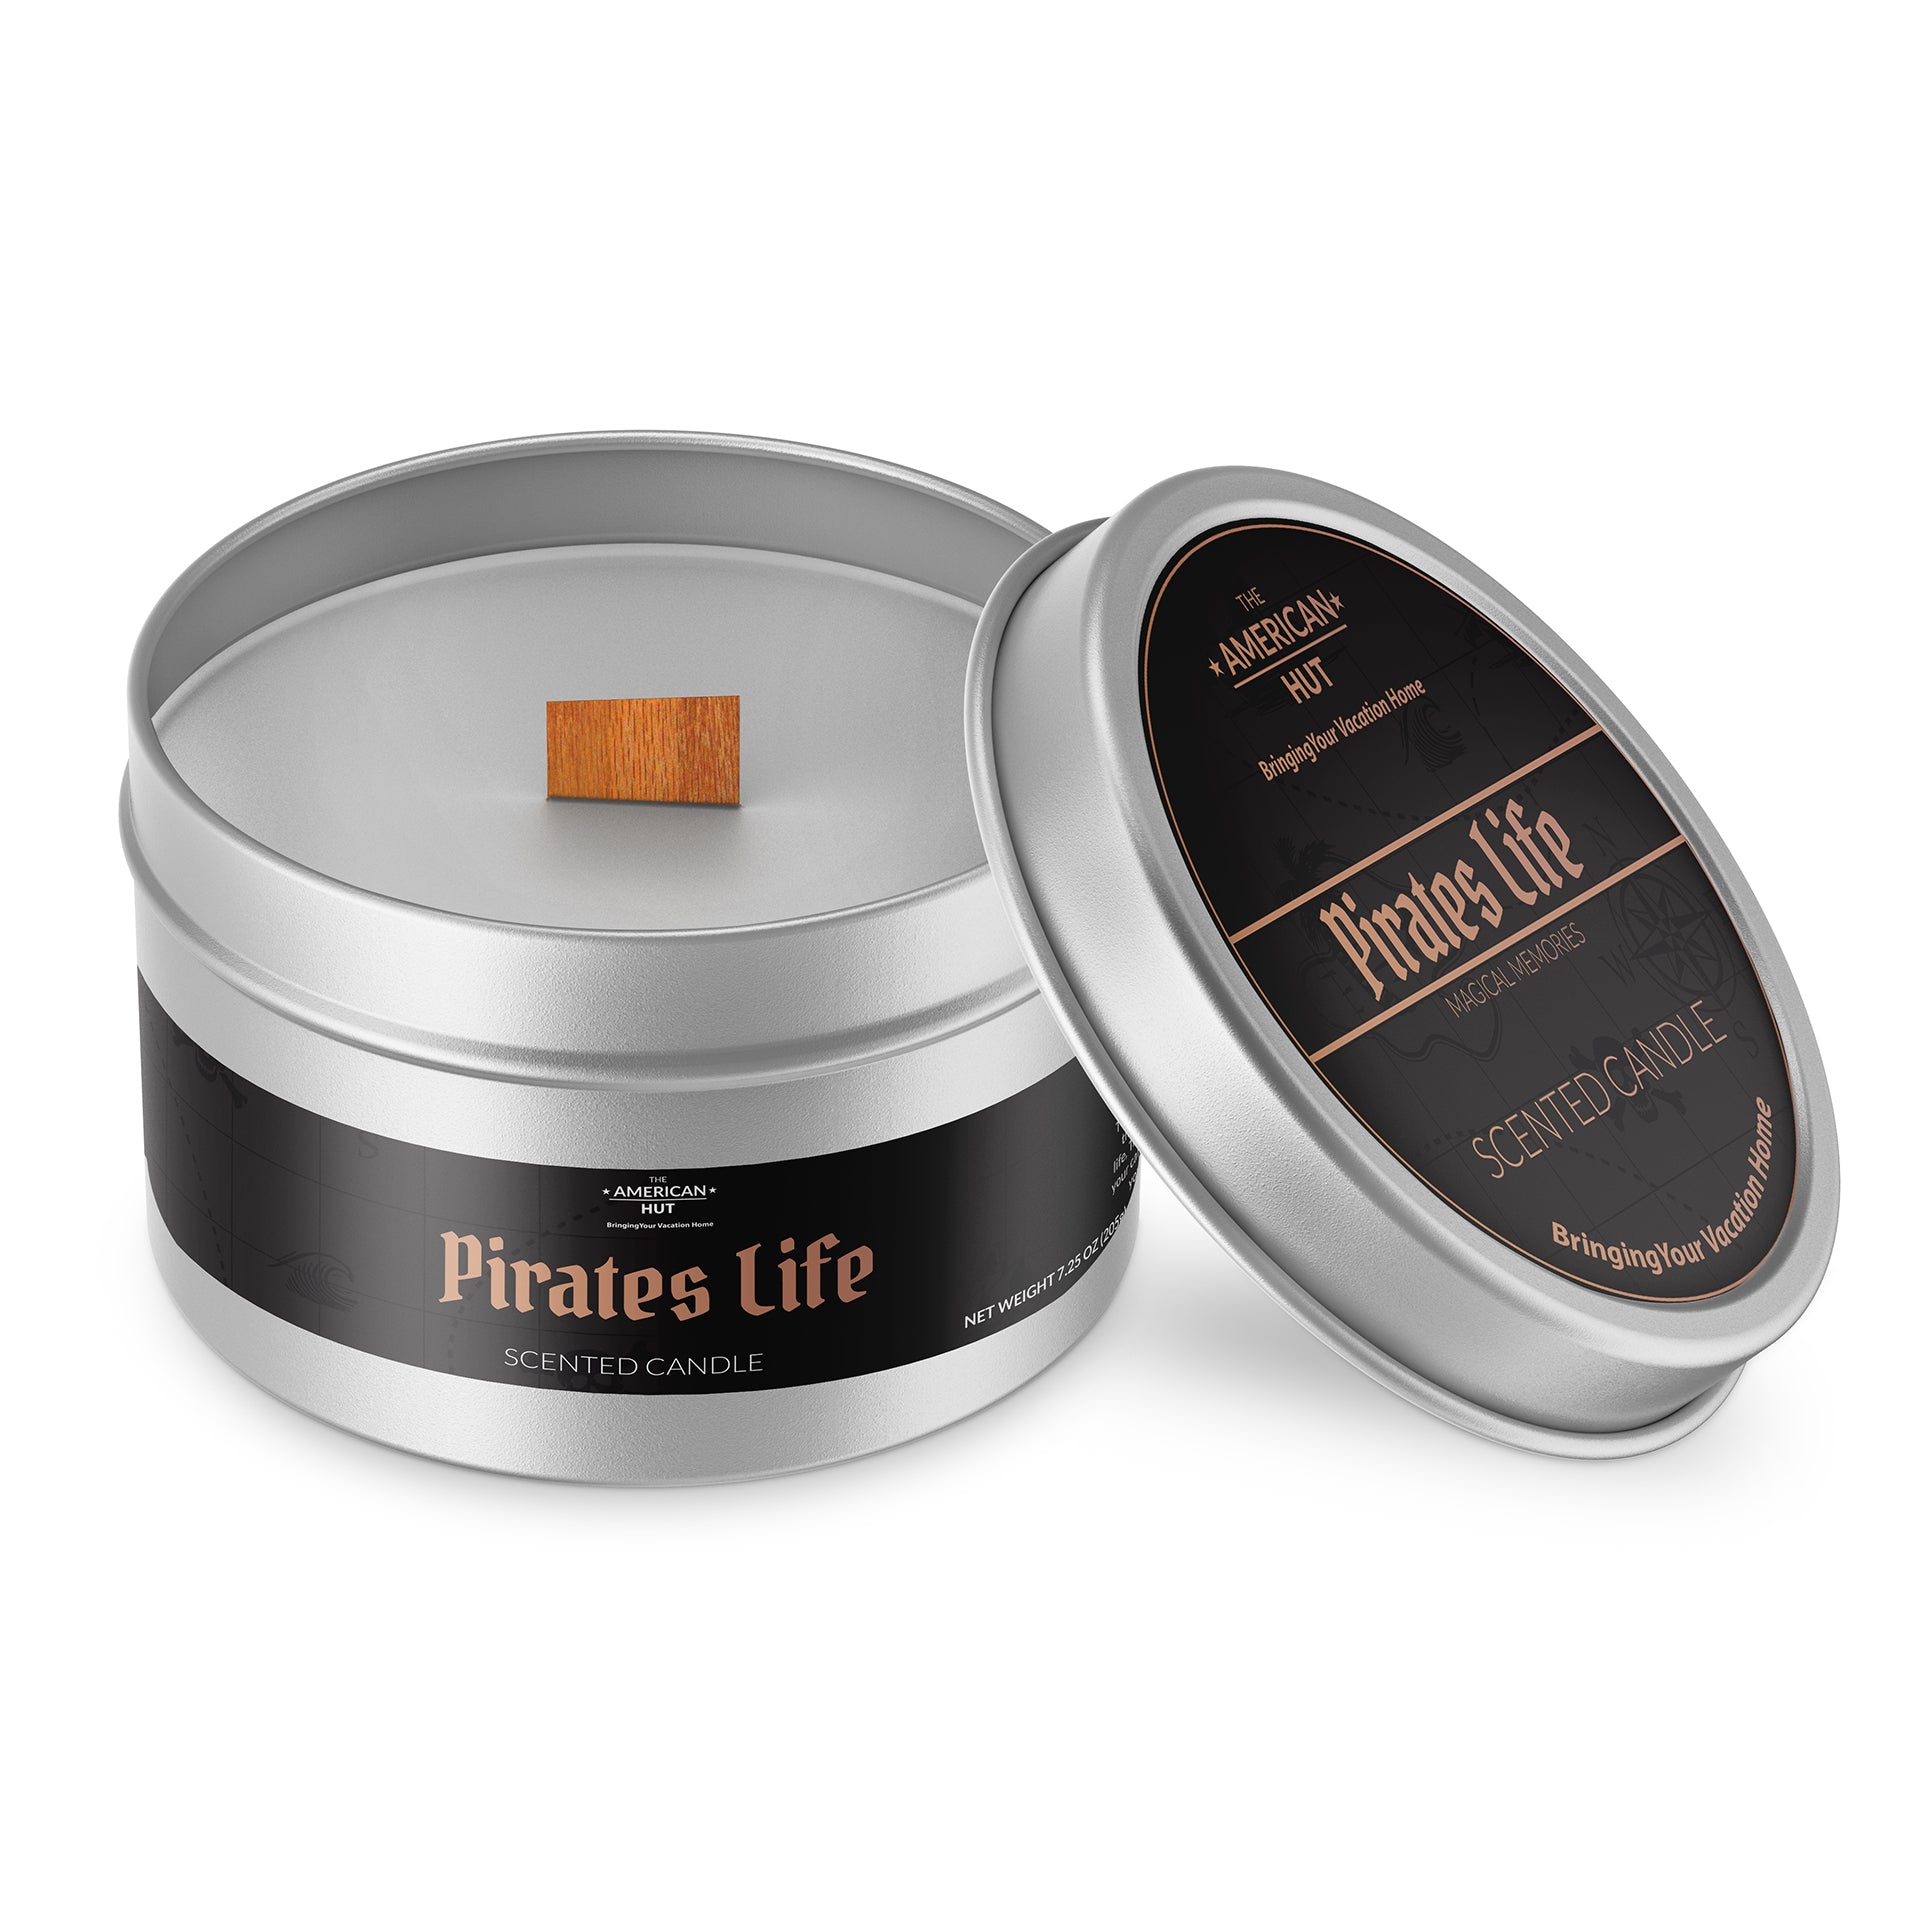 Pirates Life - Tin Candle with crackling wooden wick